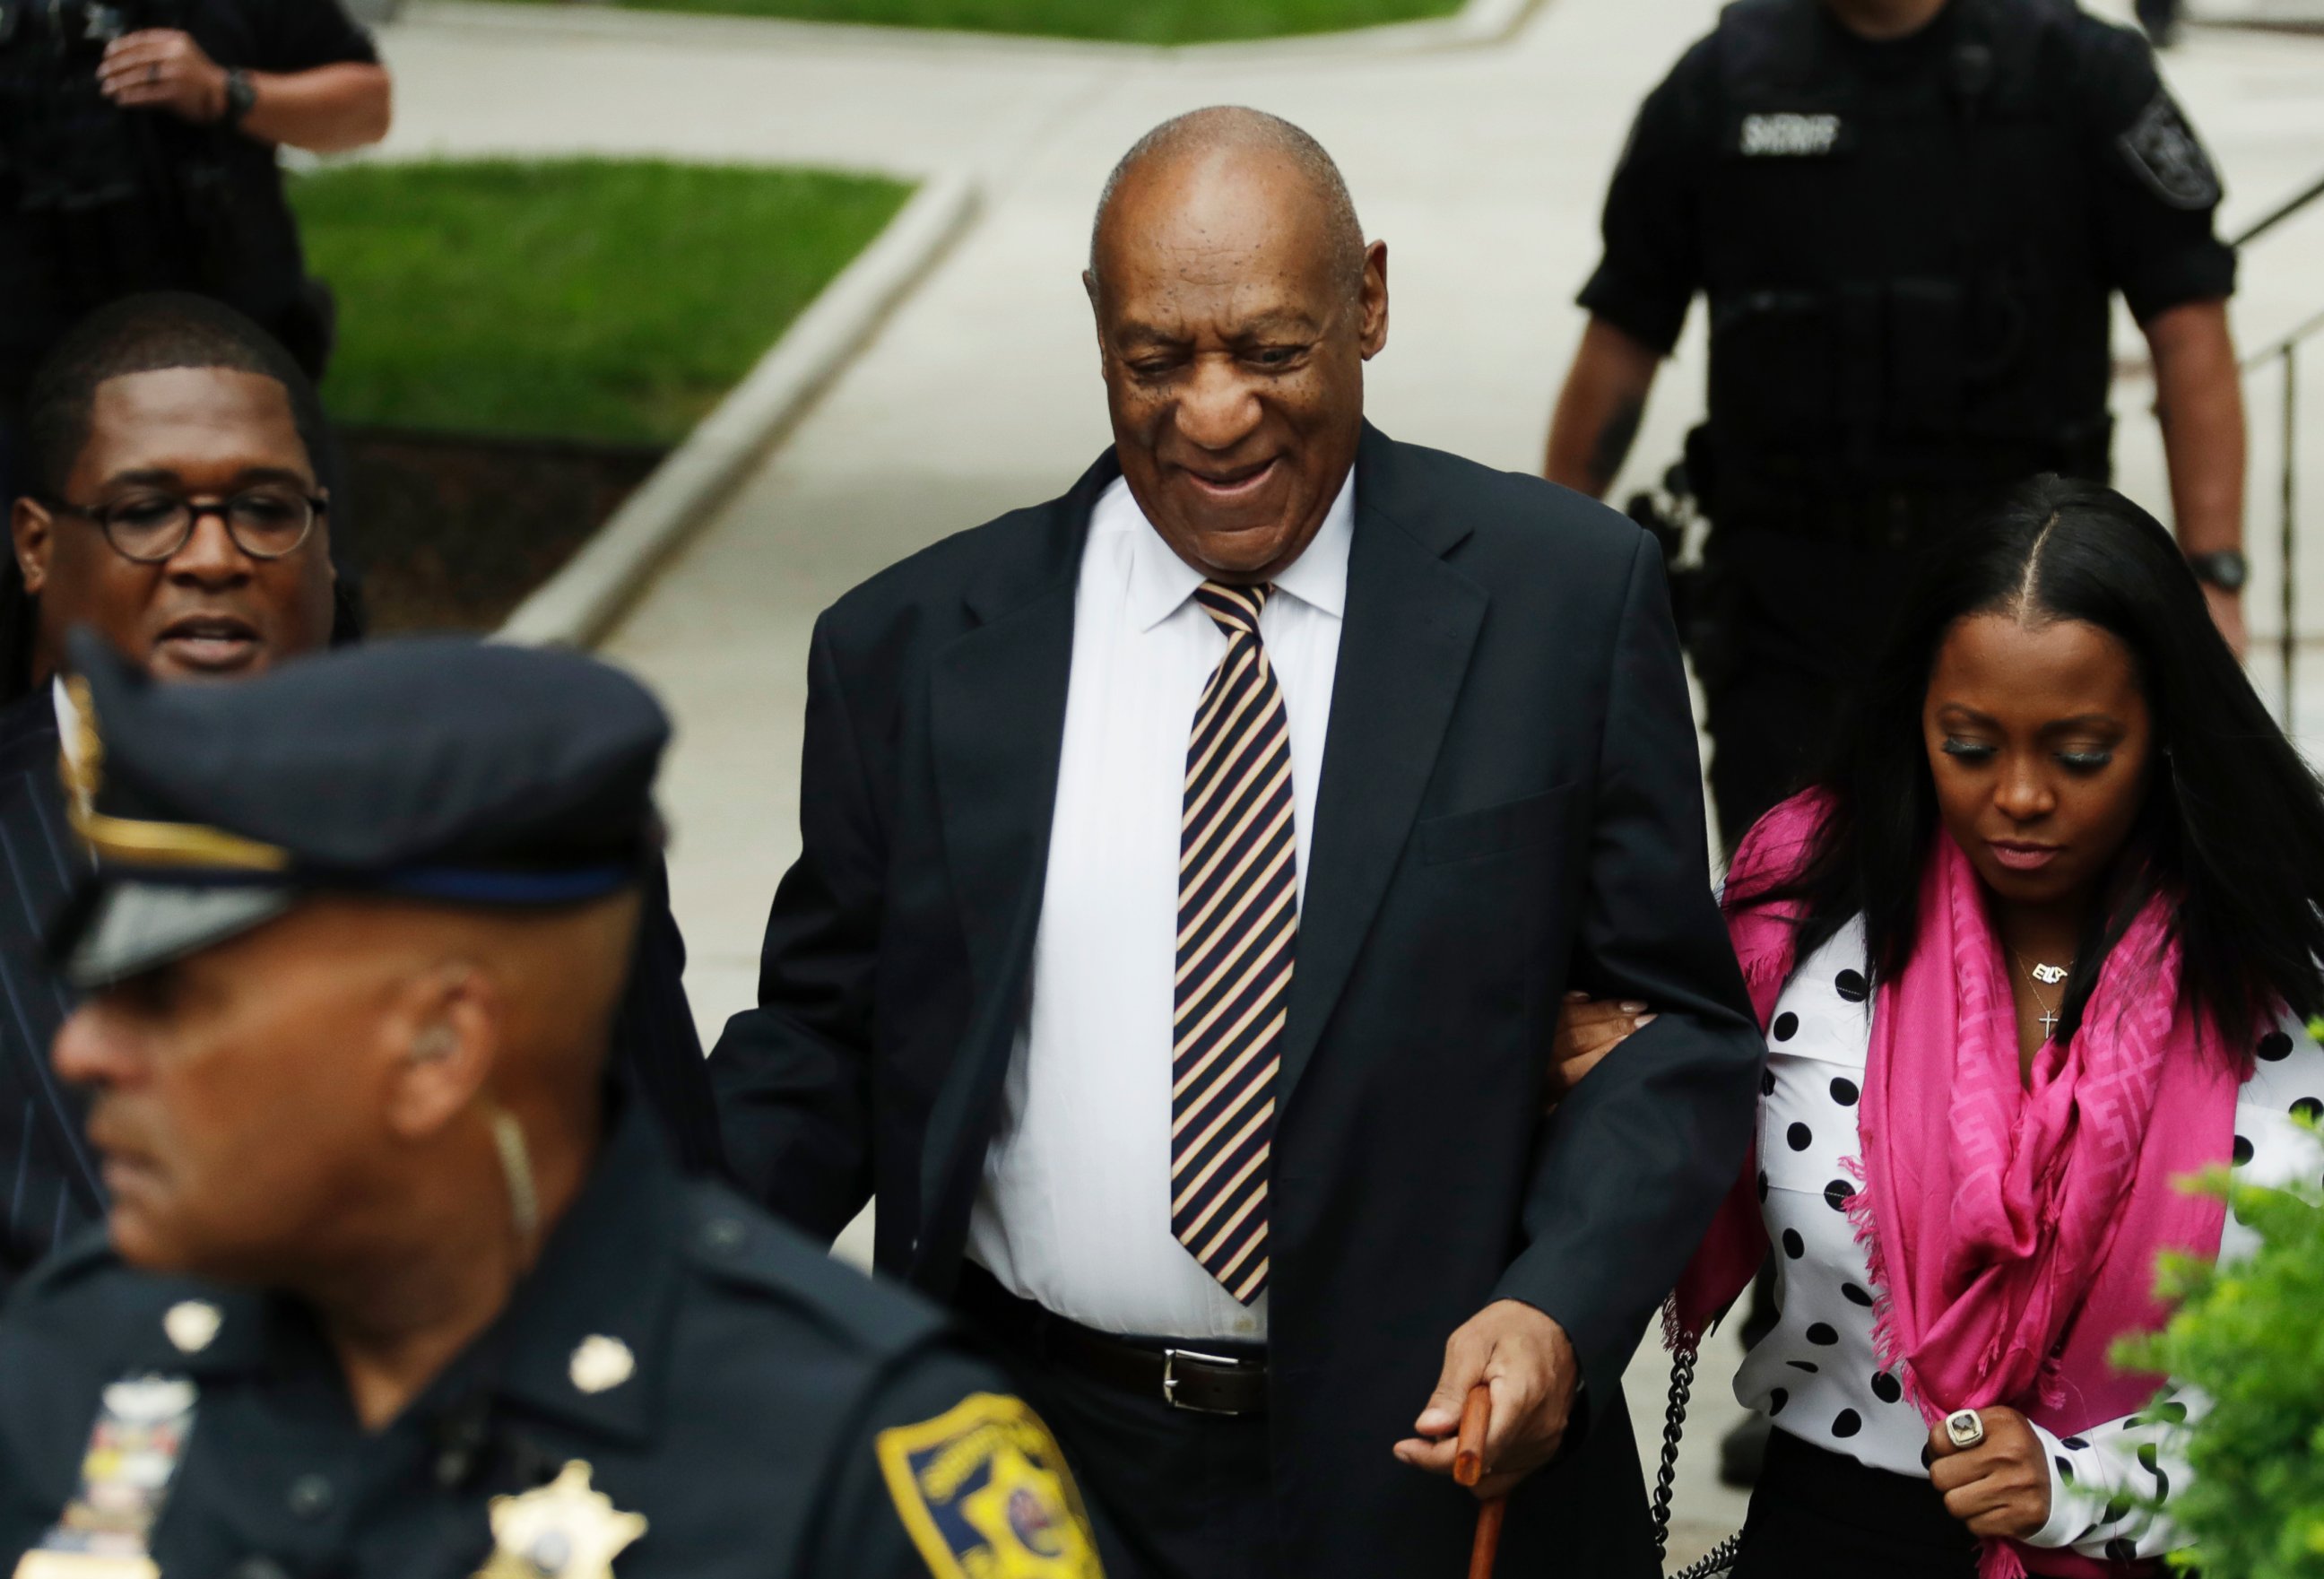 PHOTO: Bill Cosby arrives for his sexual assault trial at the Montgomery County Courthouse in Norristown, Pa., June 5, 2017.